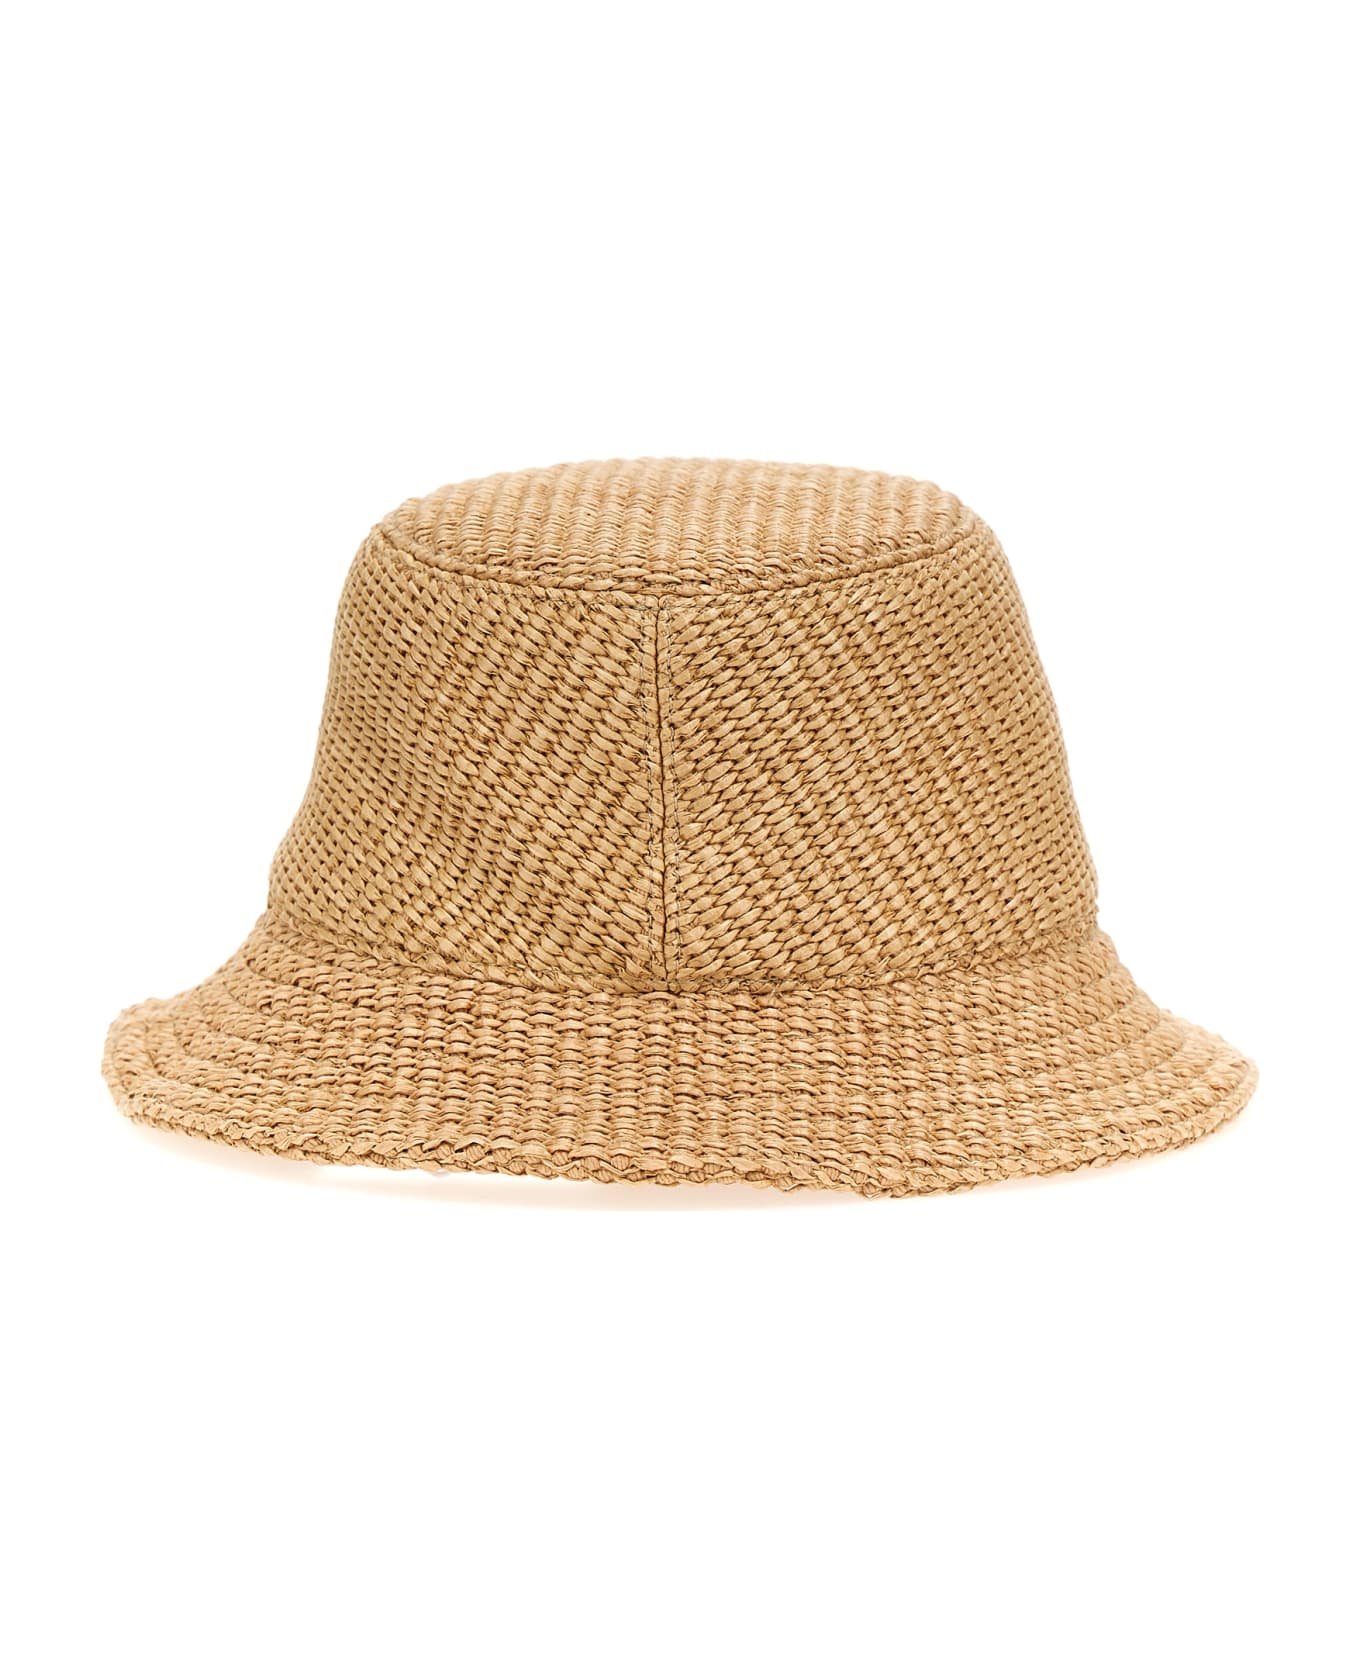 Givenchy Reversible Bucket Hat - Beige 帽子